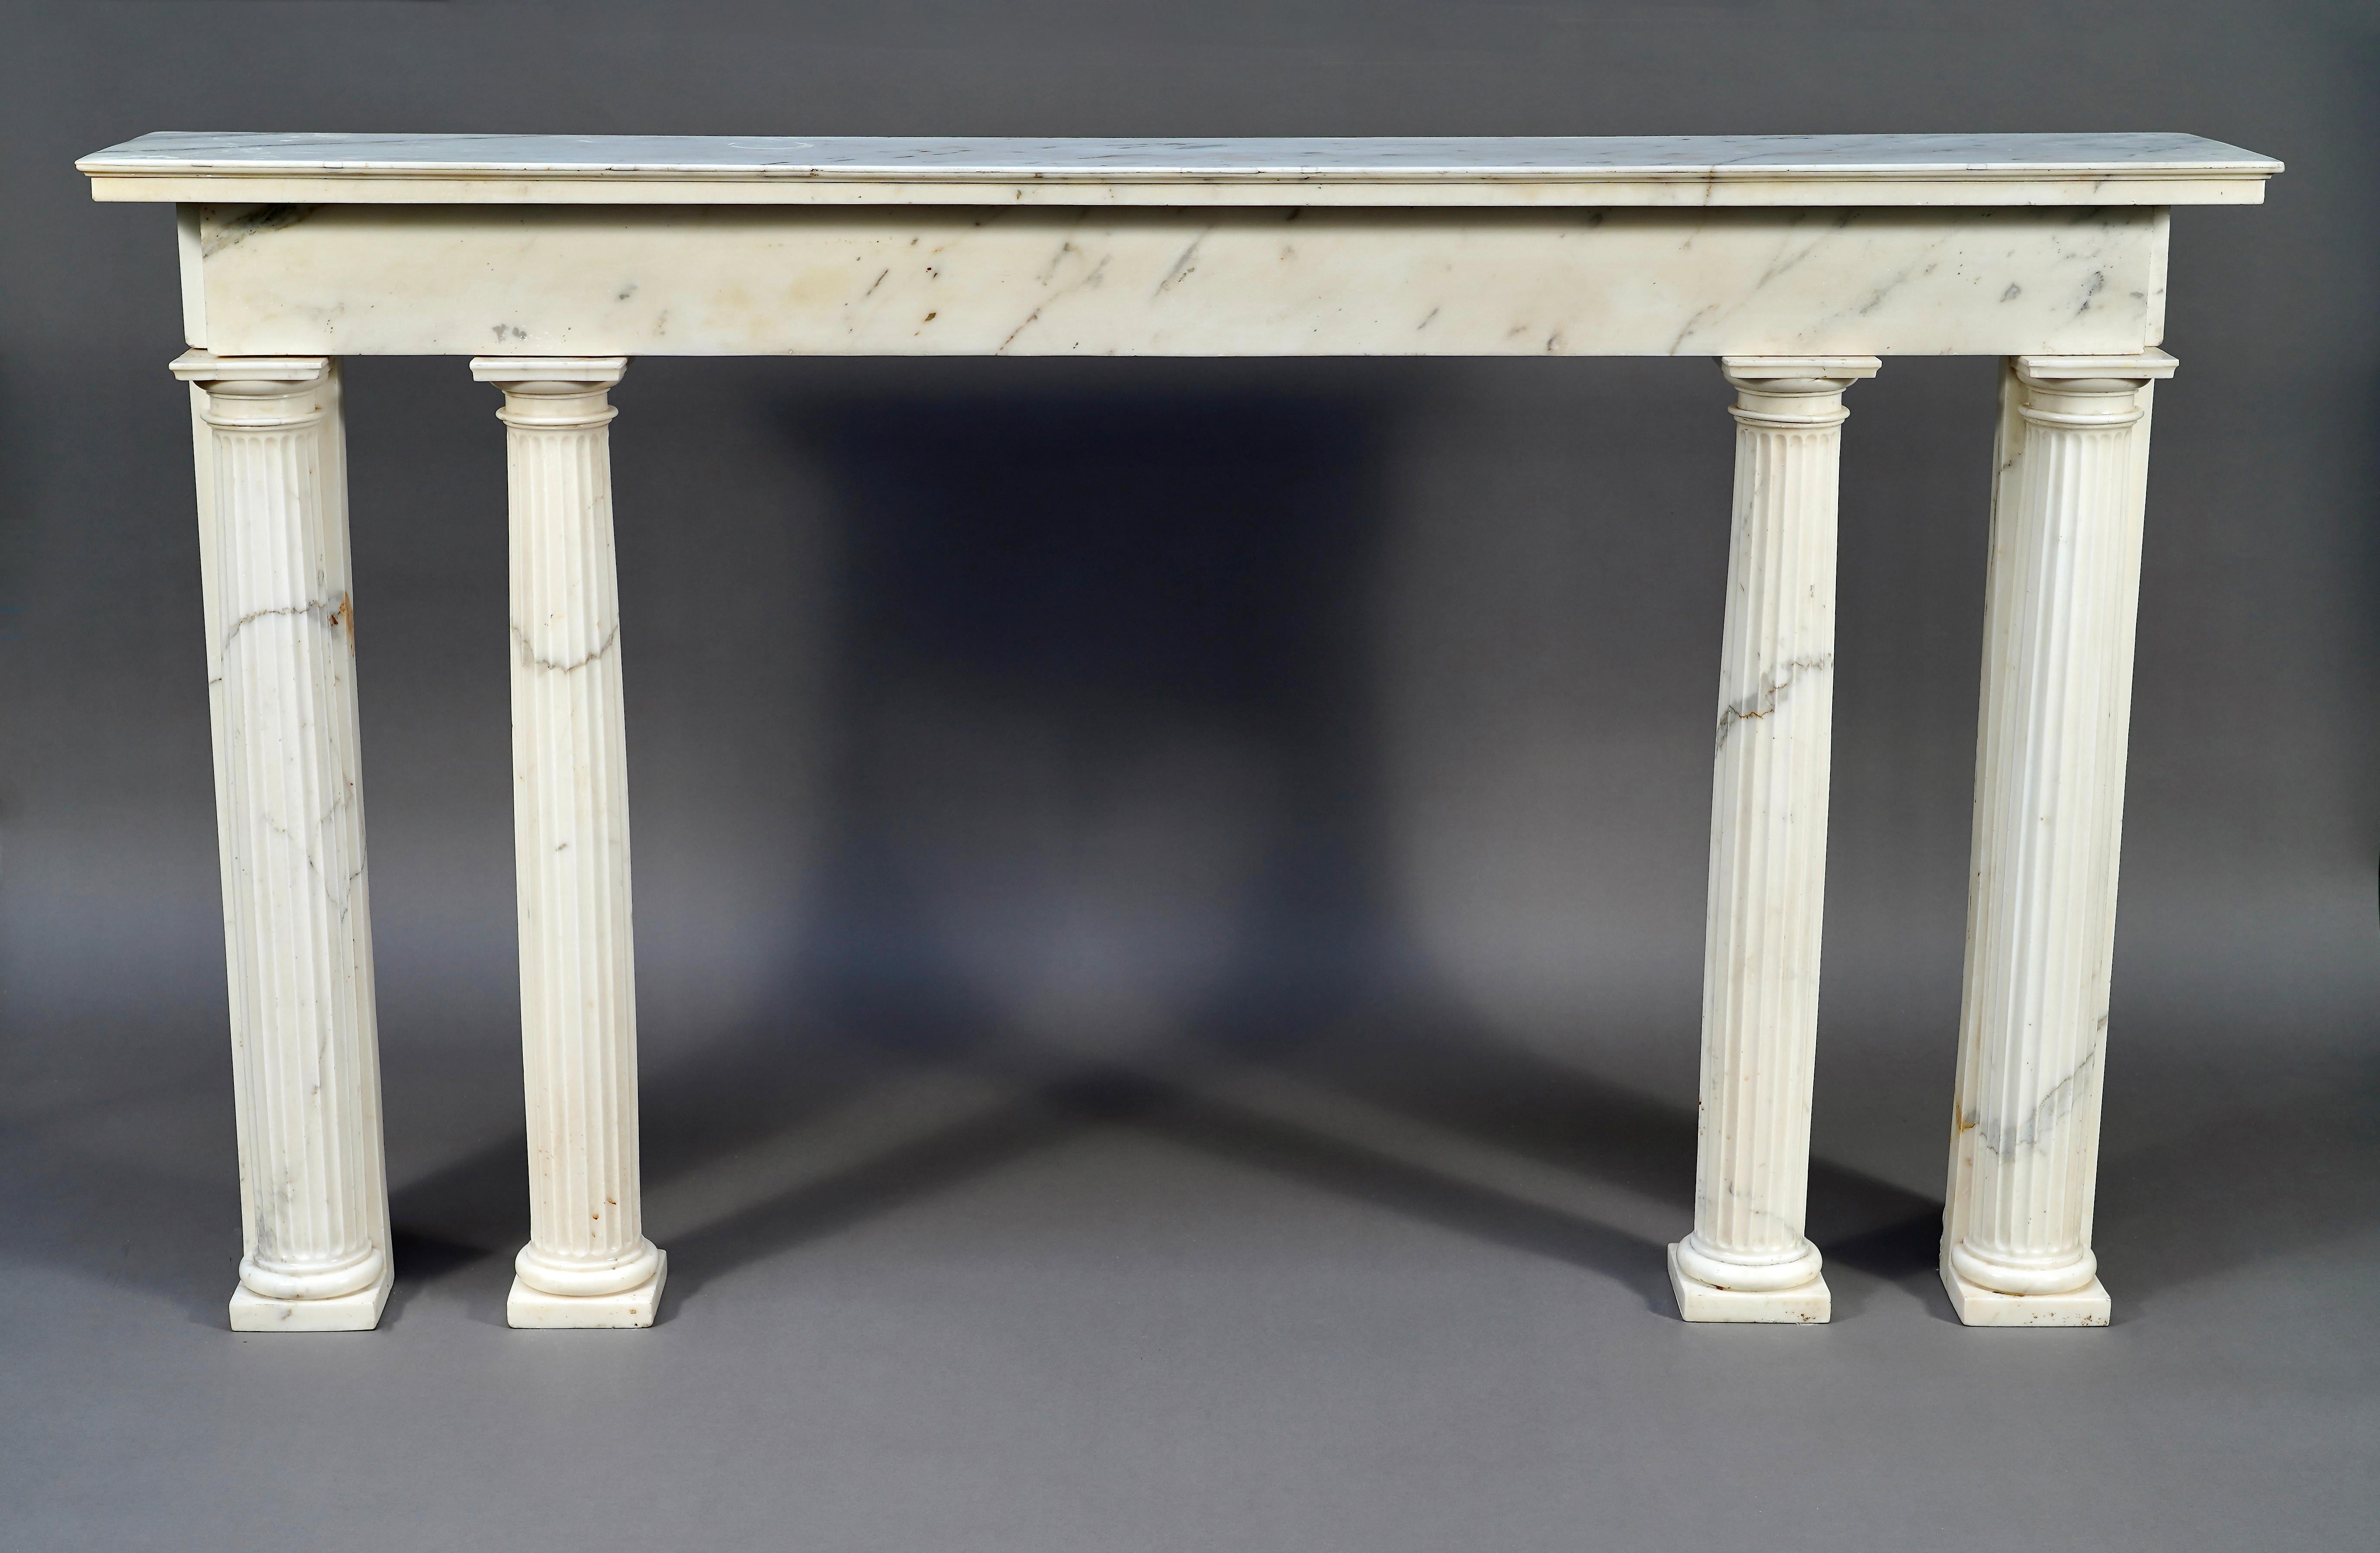 Rare neo-classical Louis XVI period console sculpted in white Carrara marble. The rectangular lintel, surmounted with a molded top, is supported by four detached fluted columns with Doric capitals.

The straight lines and refined style of this